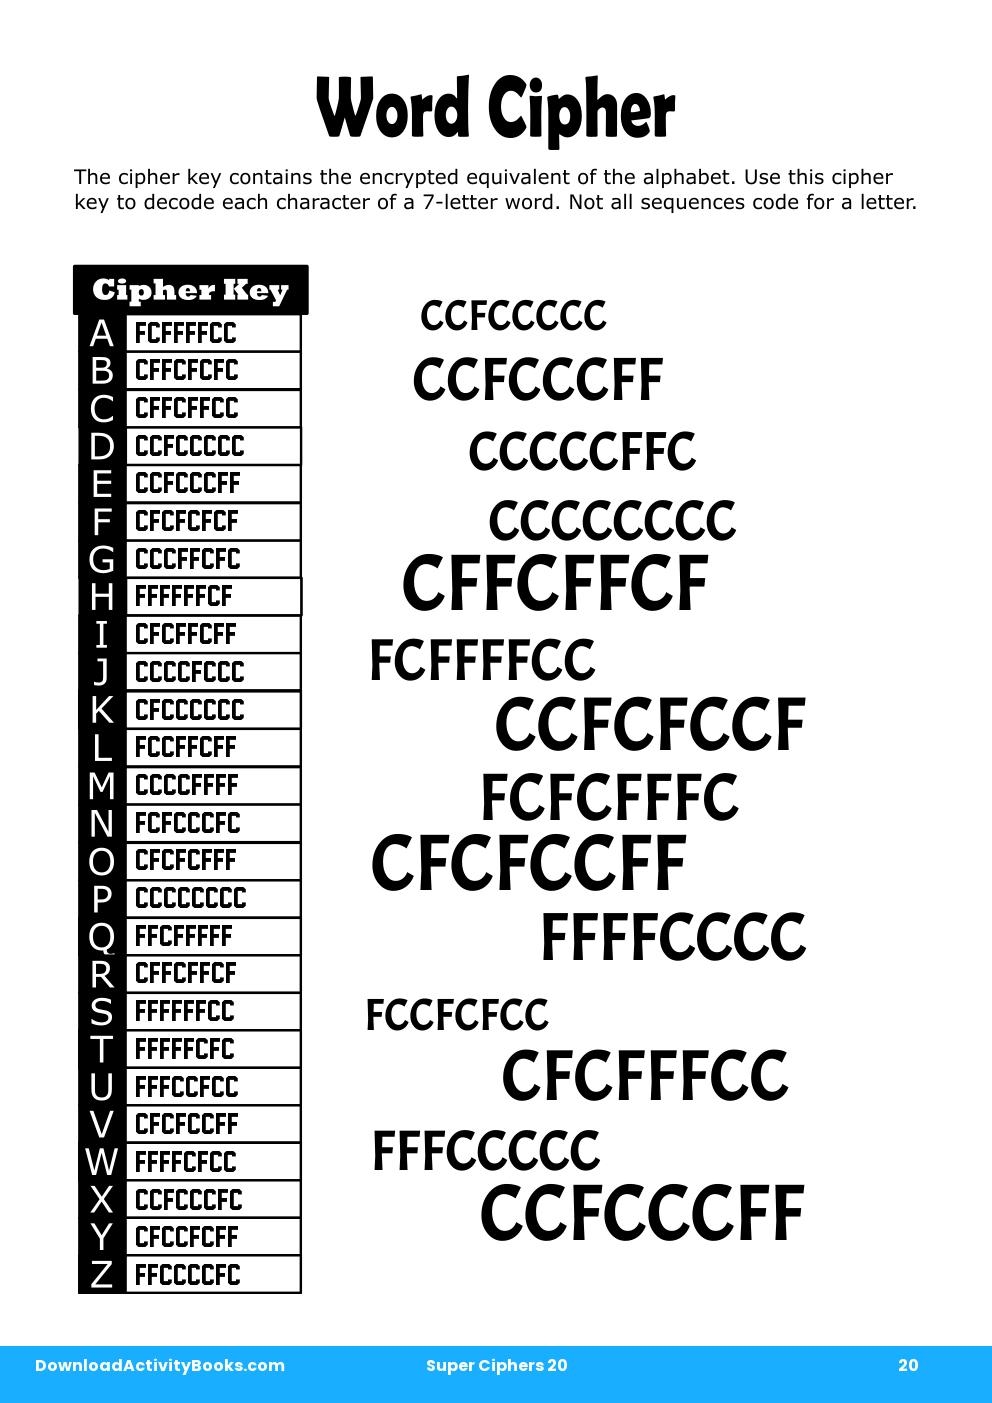 Word Cipher in Super Ciphers 20